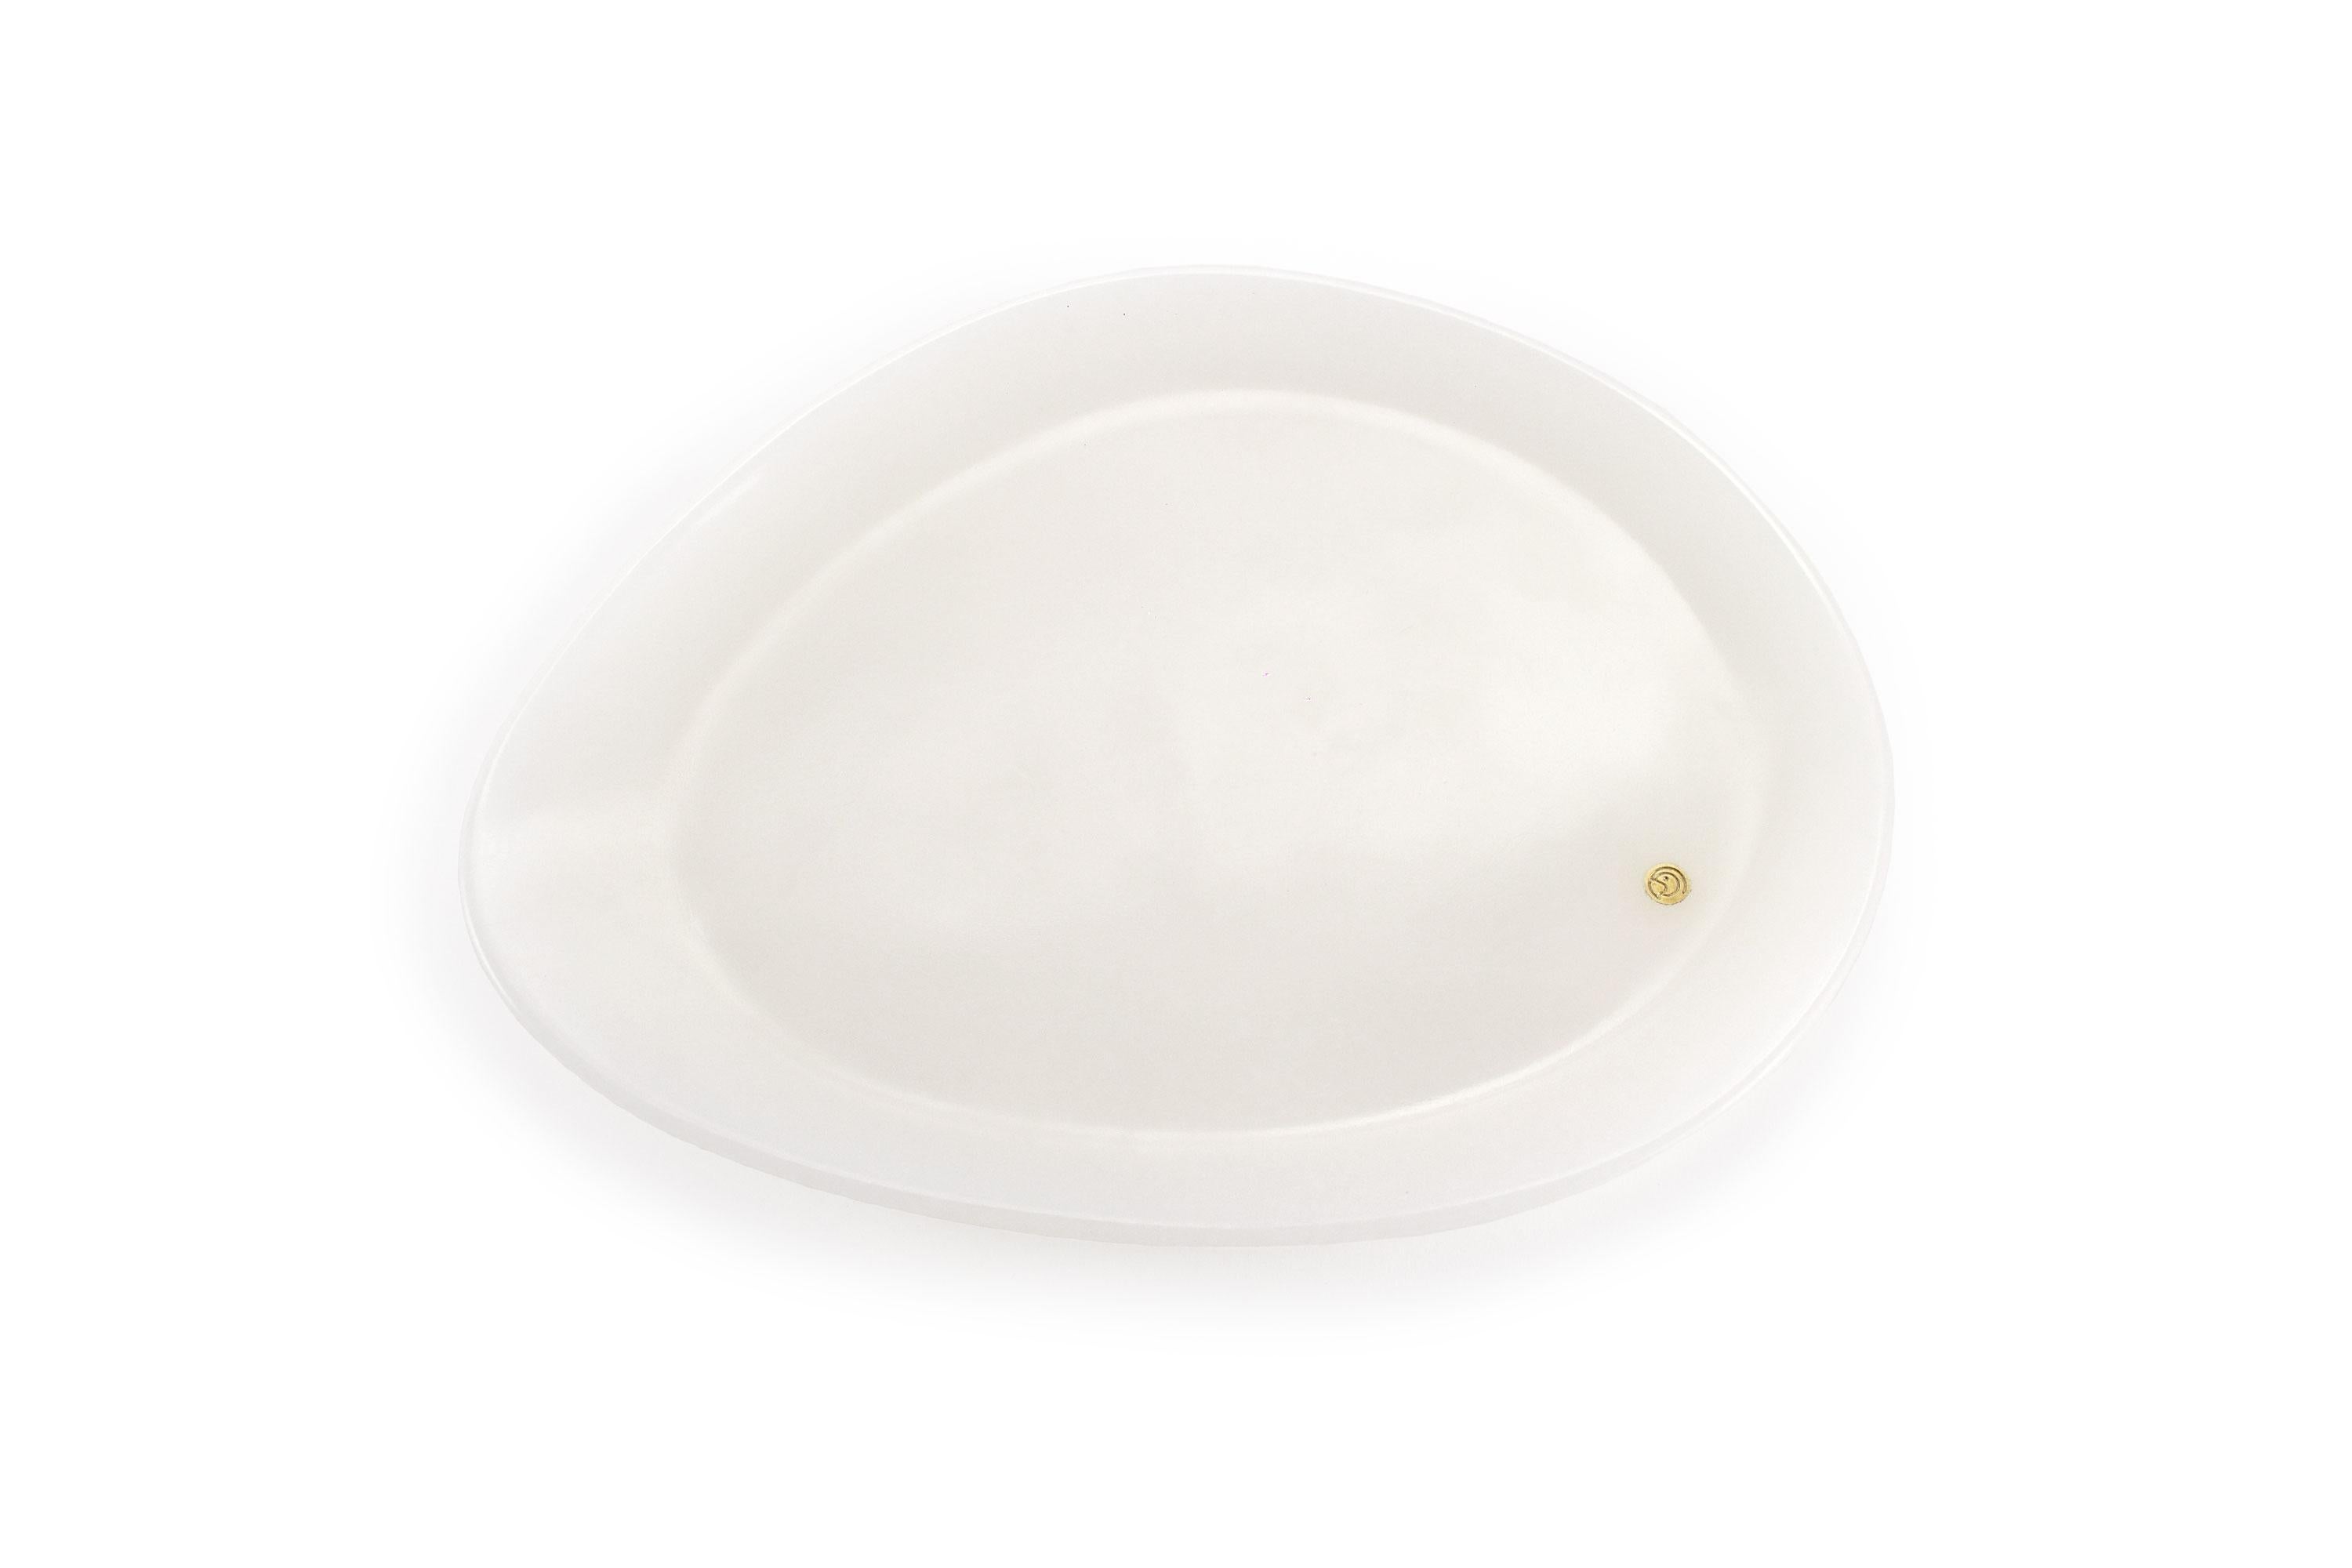 Hand carved presentation plate from White onyx. Multiple use as plates, platters and placers. The polished finishing underlines the transparency of the onyx making this a very precious object. 

Dimensions: Small L 24, W 20, H 1.8 cm, also